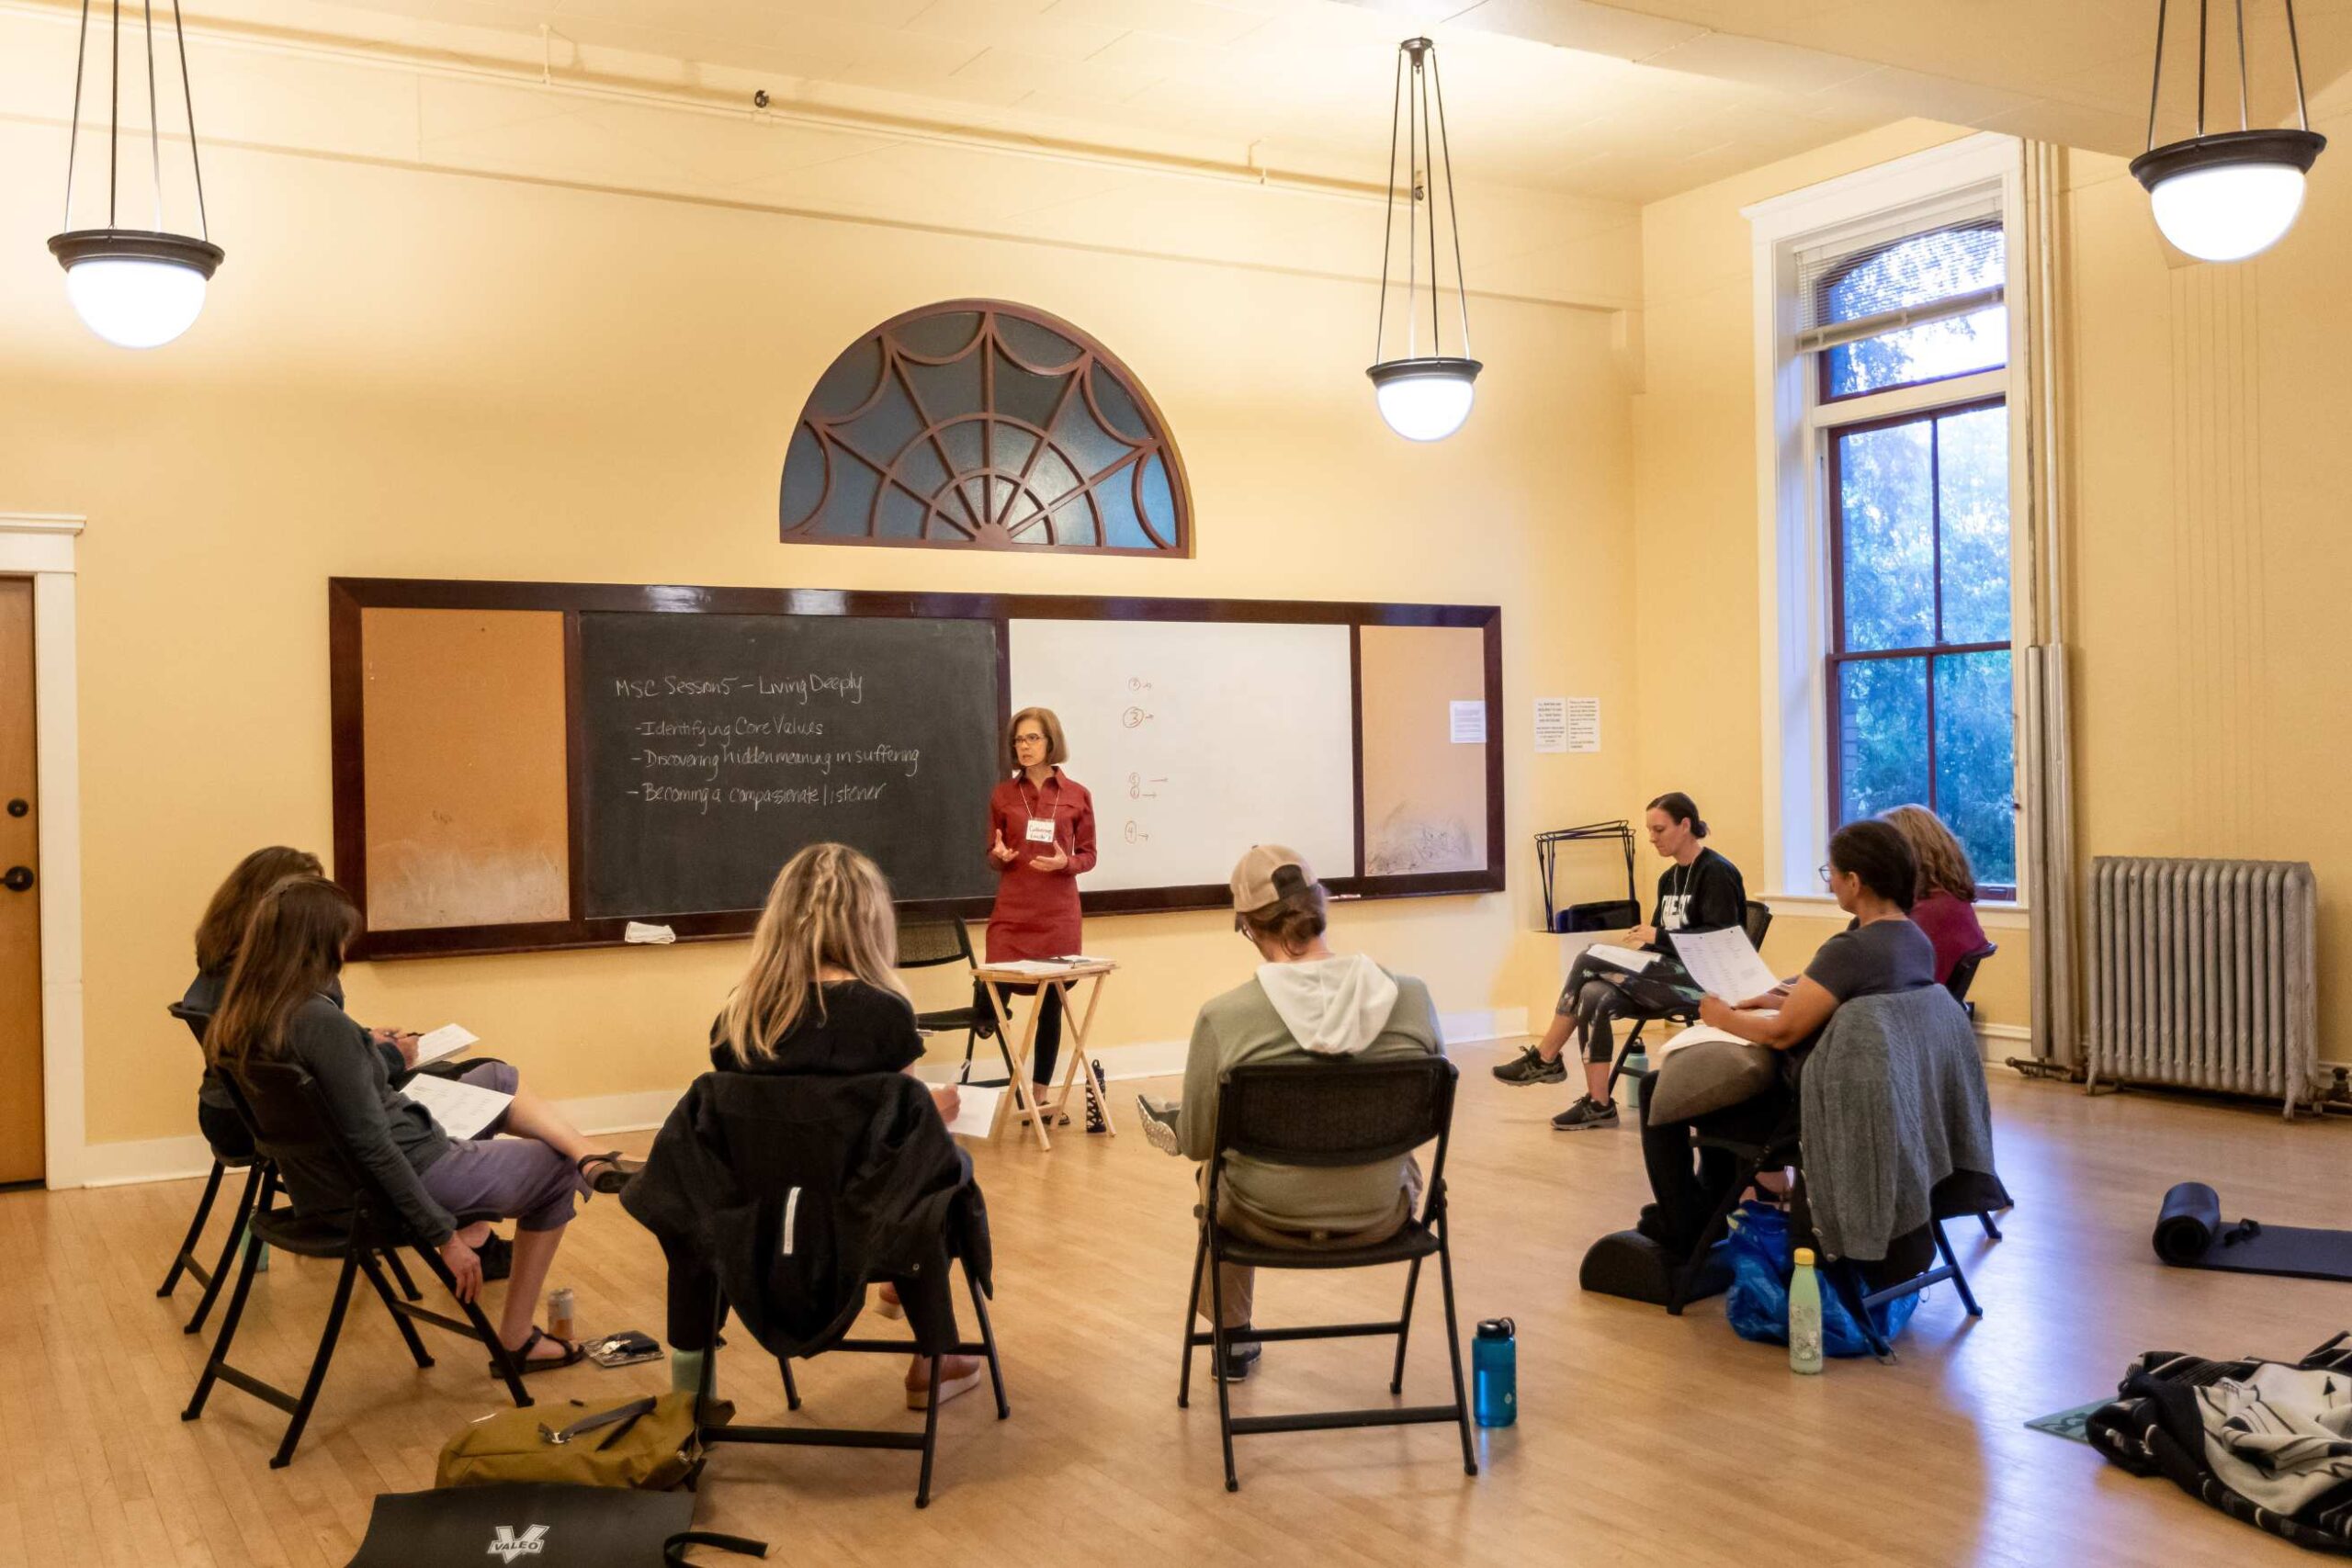 A bright room with high ceilings that has a circle of chairs facing a chalkboard, where the teacher stands and teaches mindfulness topics.